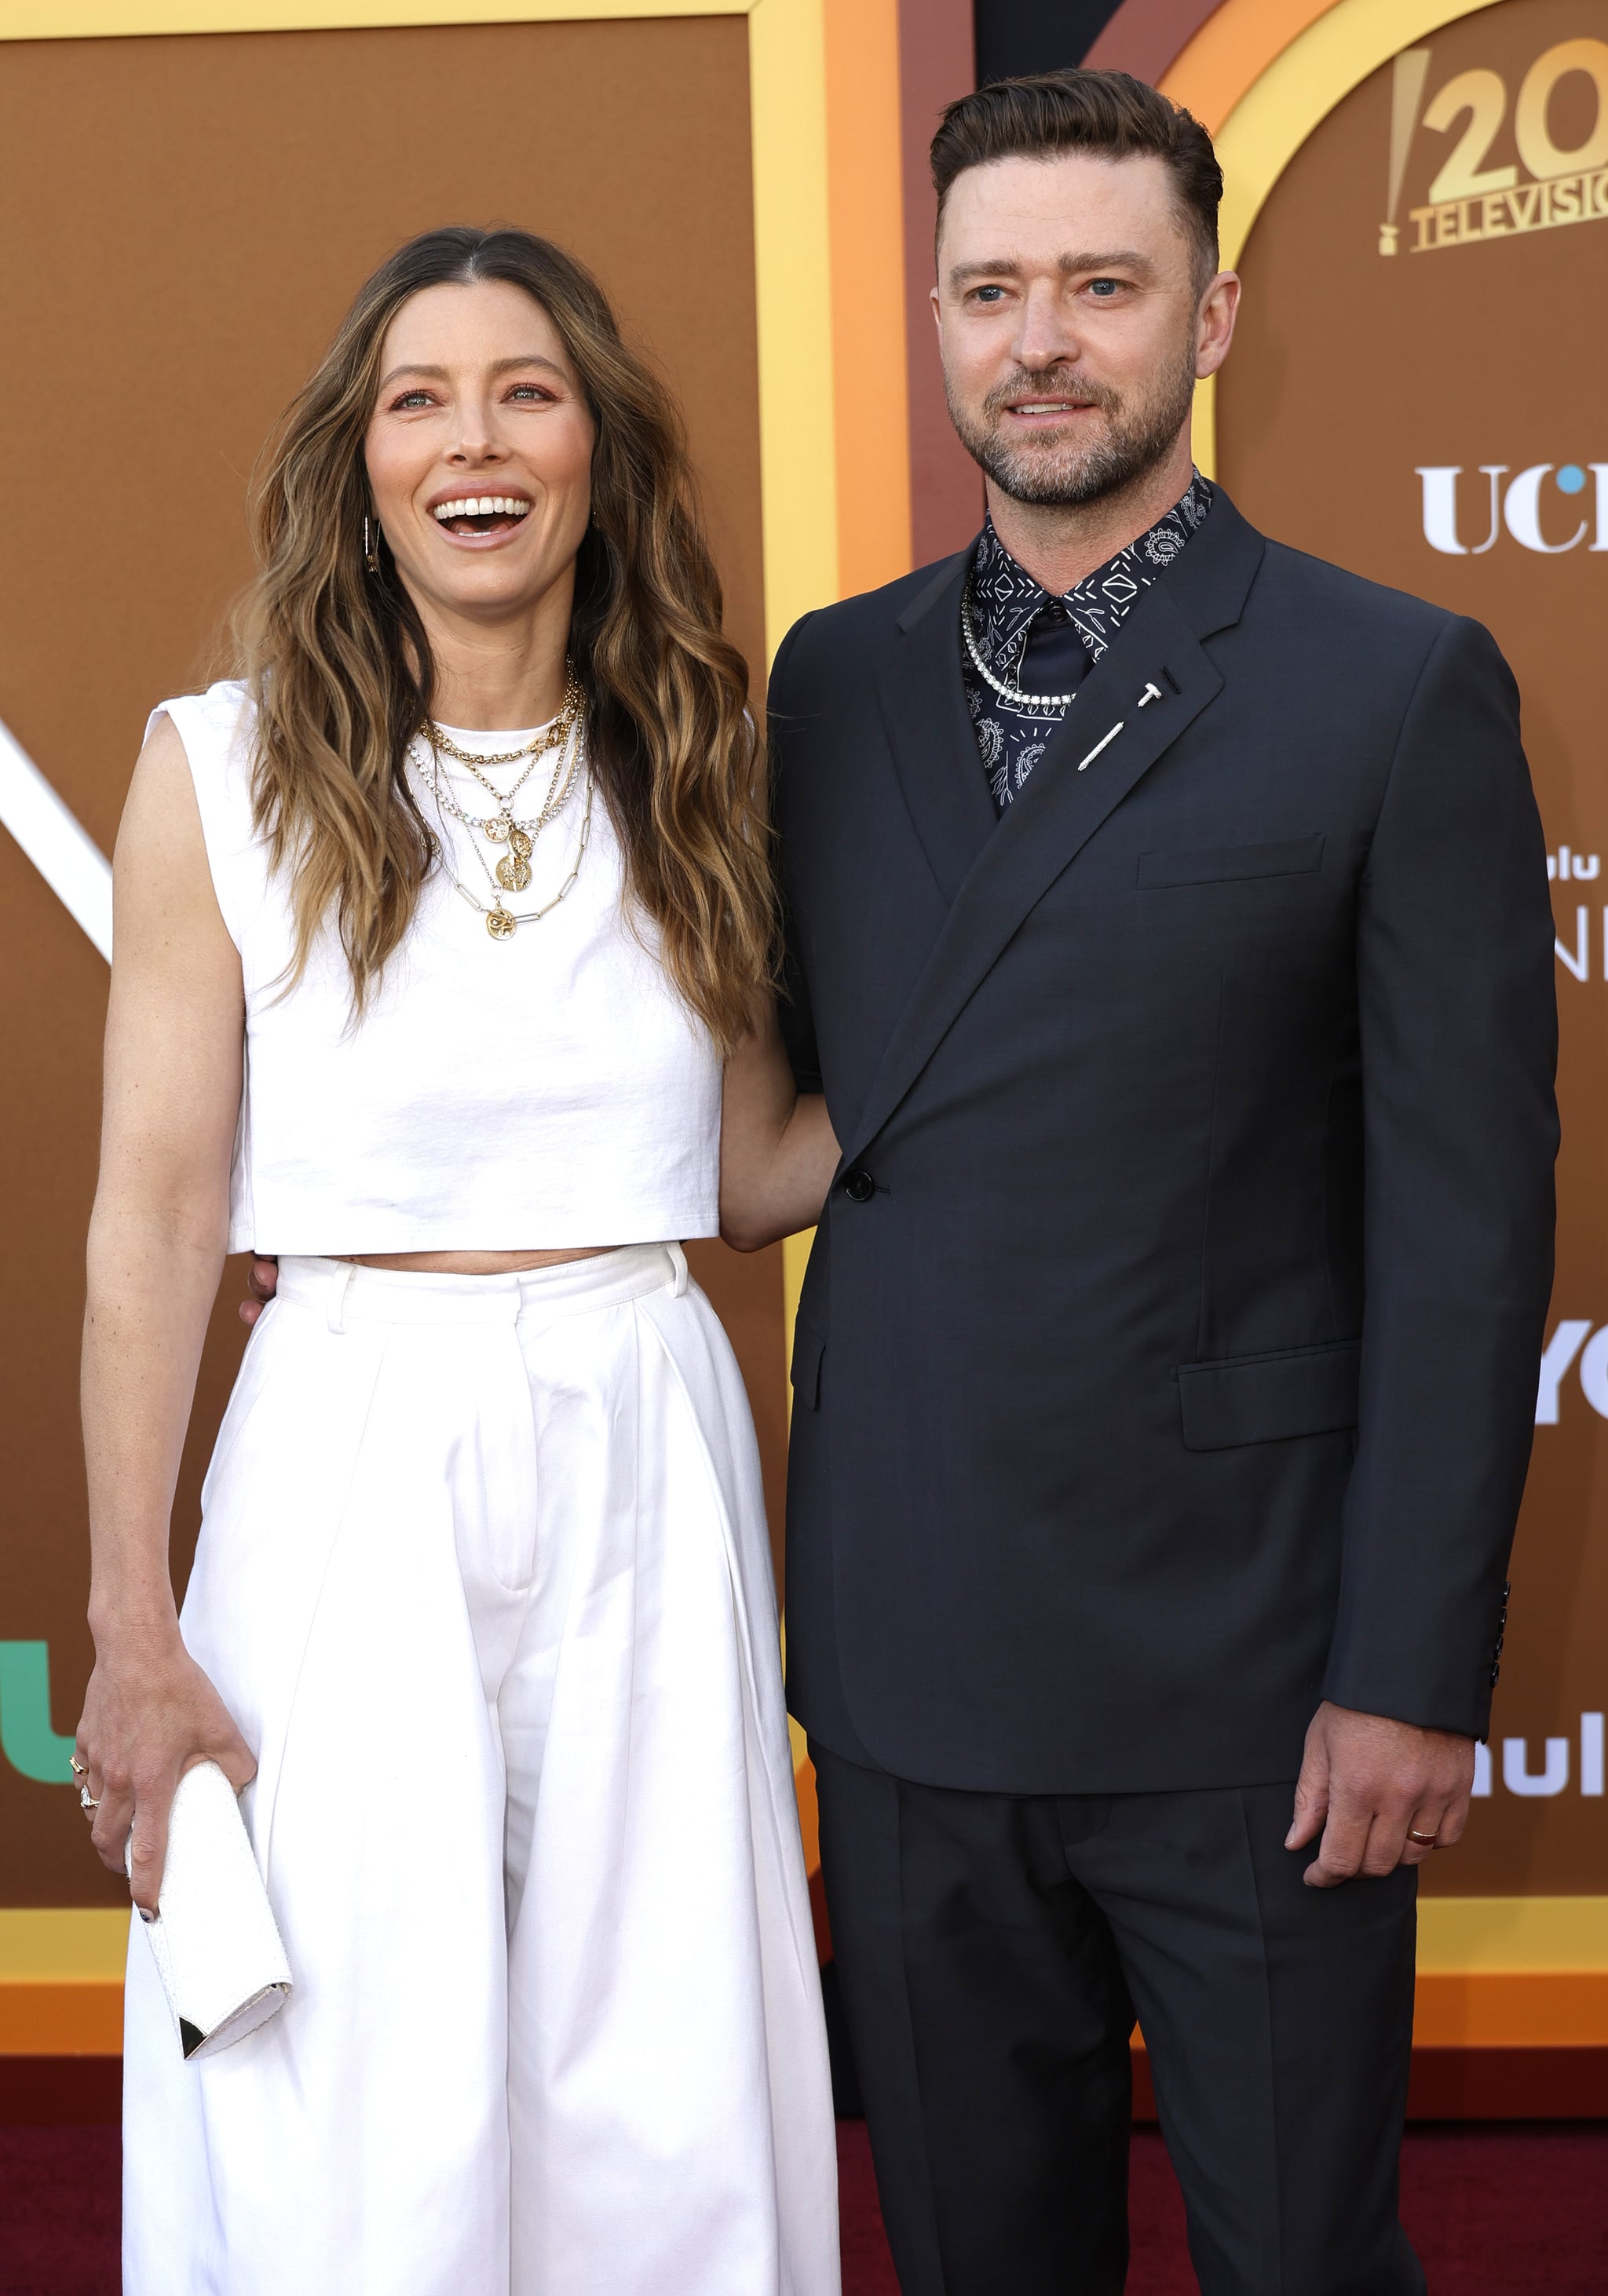 Justin Timberlake and Jessica Biel Just Shared Rare Pics of Their